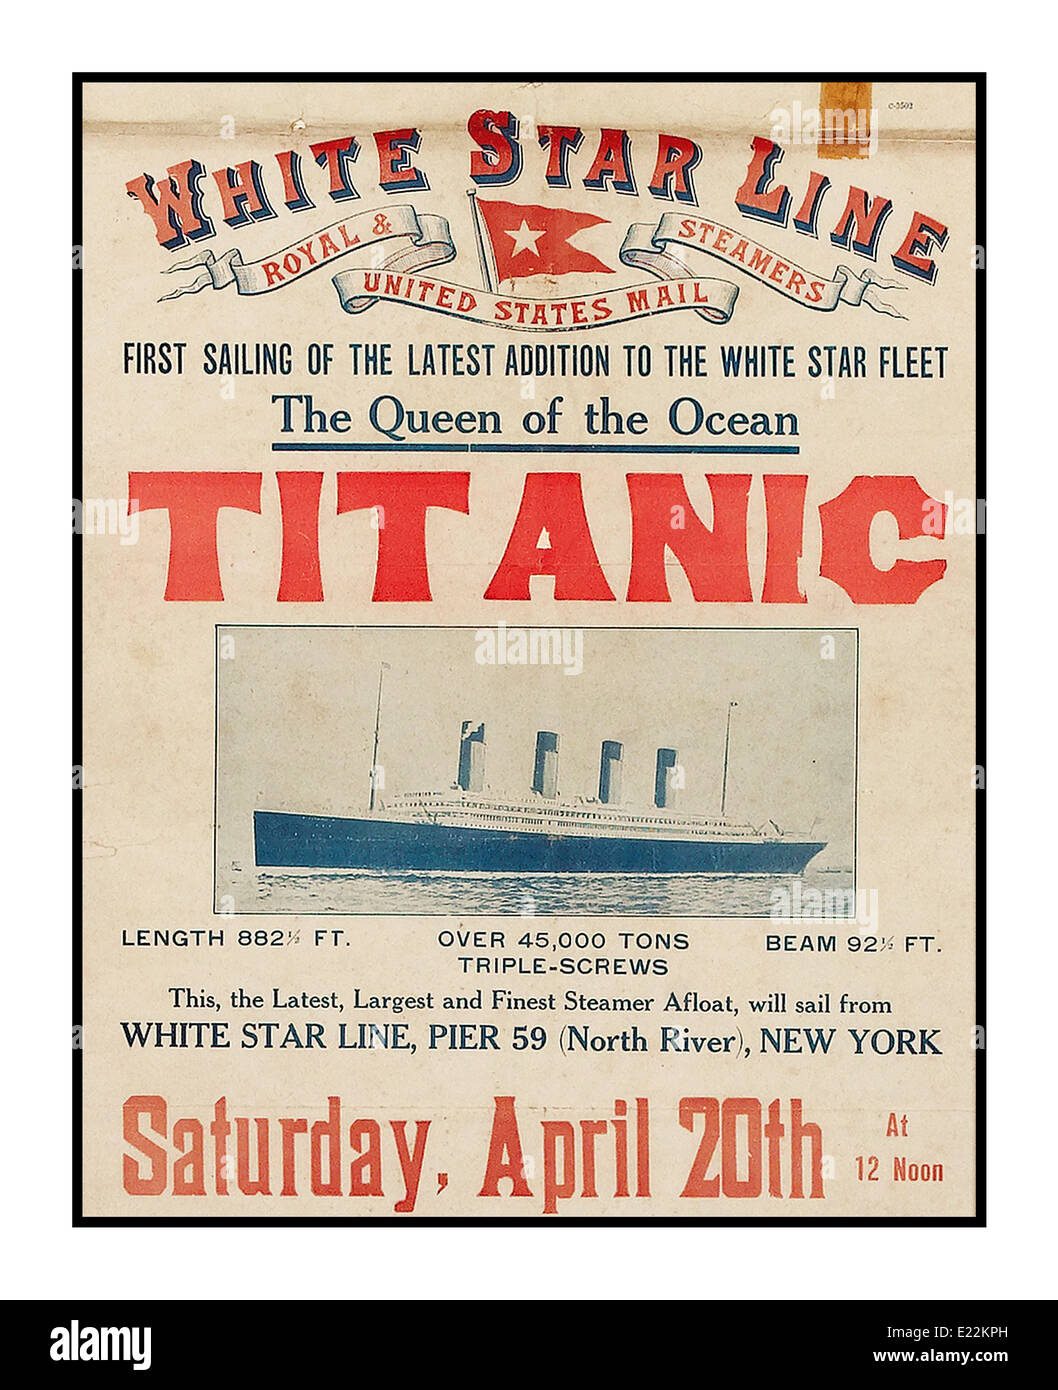 naufrage - Le RMS Lusitania - Page 11 Titanic-poster-advertising-the-first-sailing-of-titanic-from-new-york-E22KPH